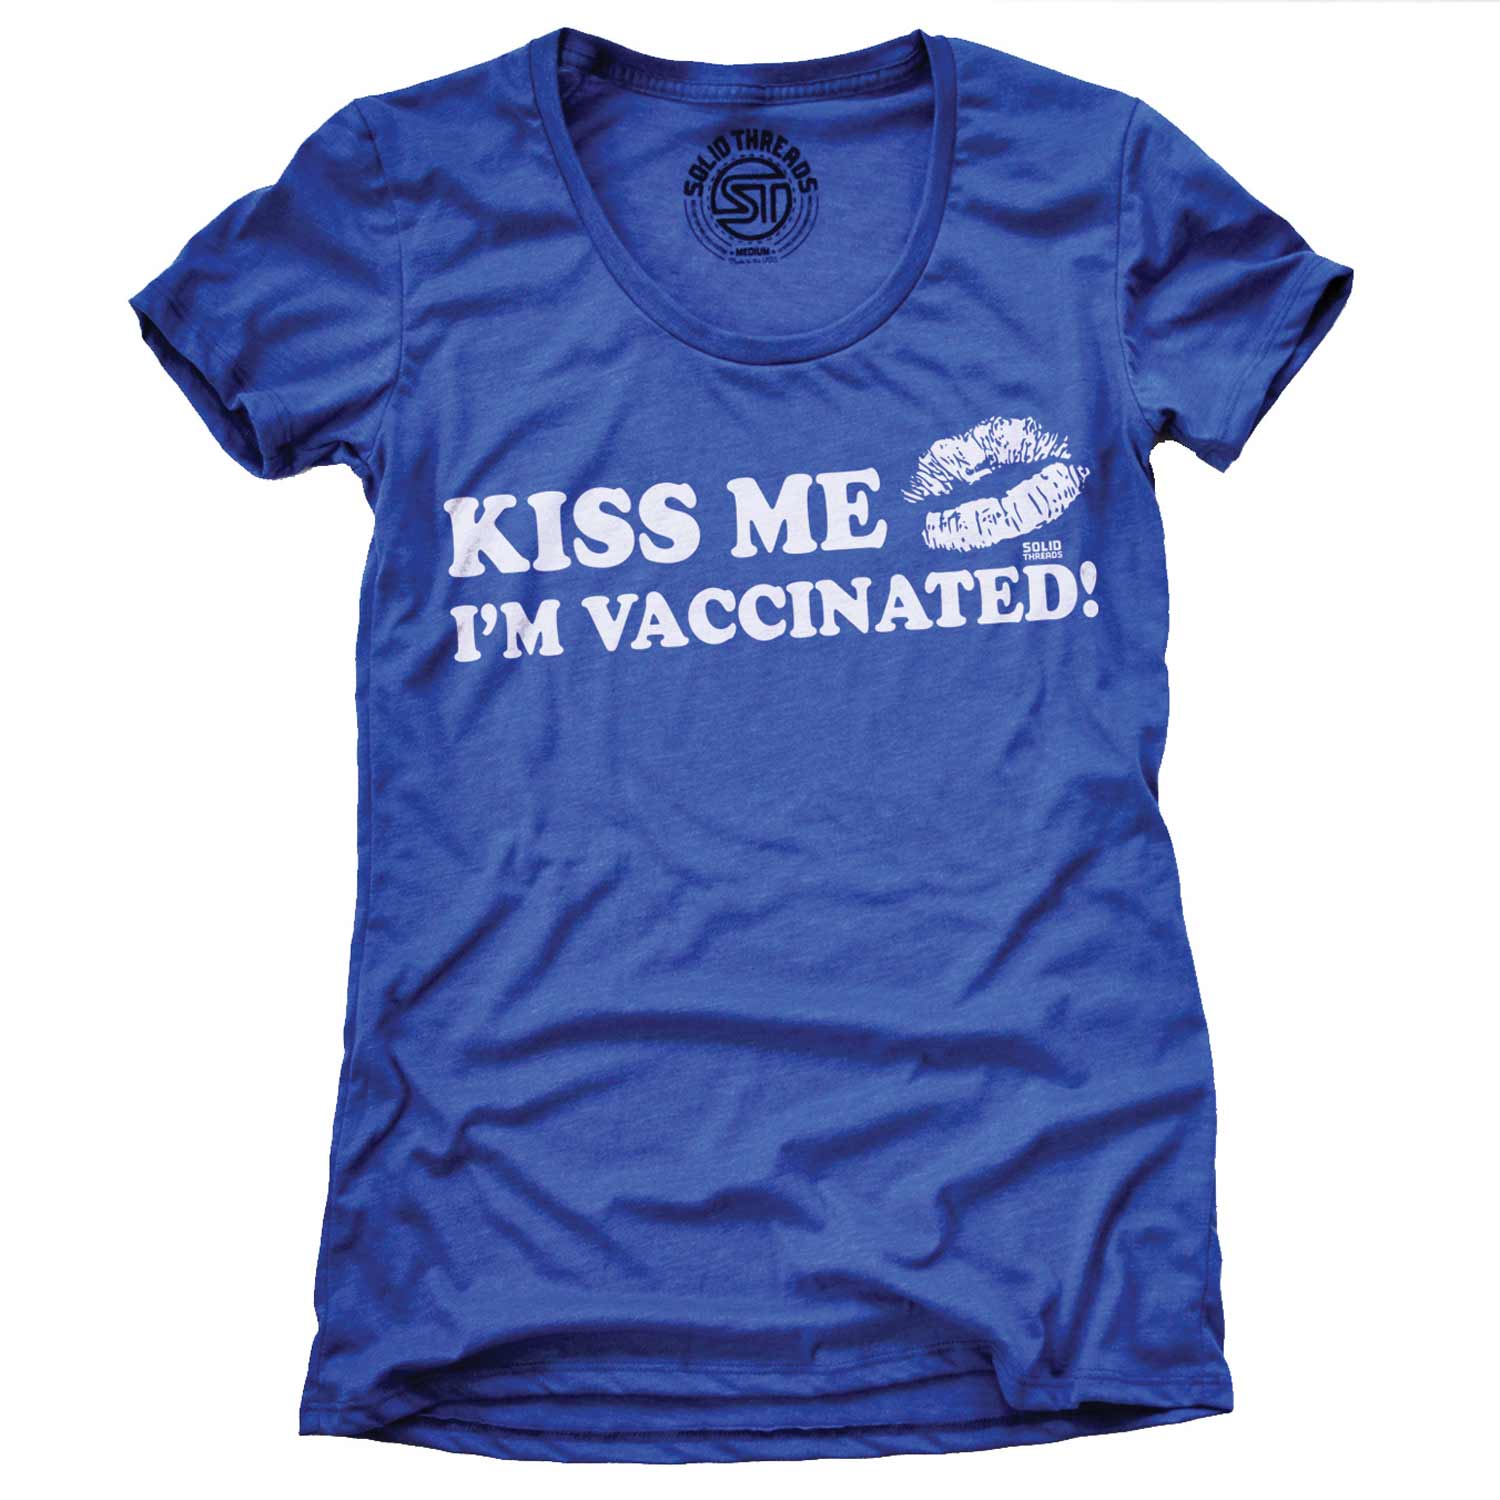 Women's Kiss Me I'm Vaccinated Cool Vintage Graphic Tee Proceeds Support Science | Solid Threads